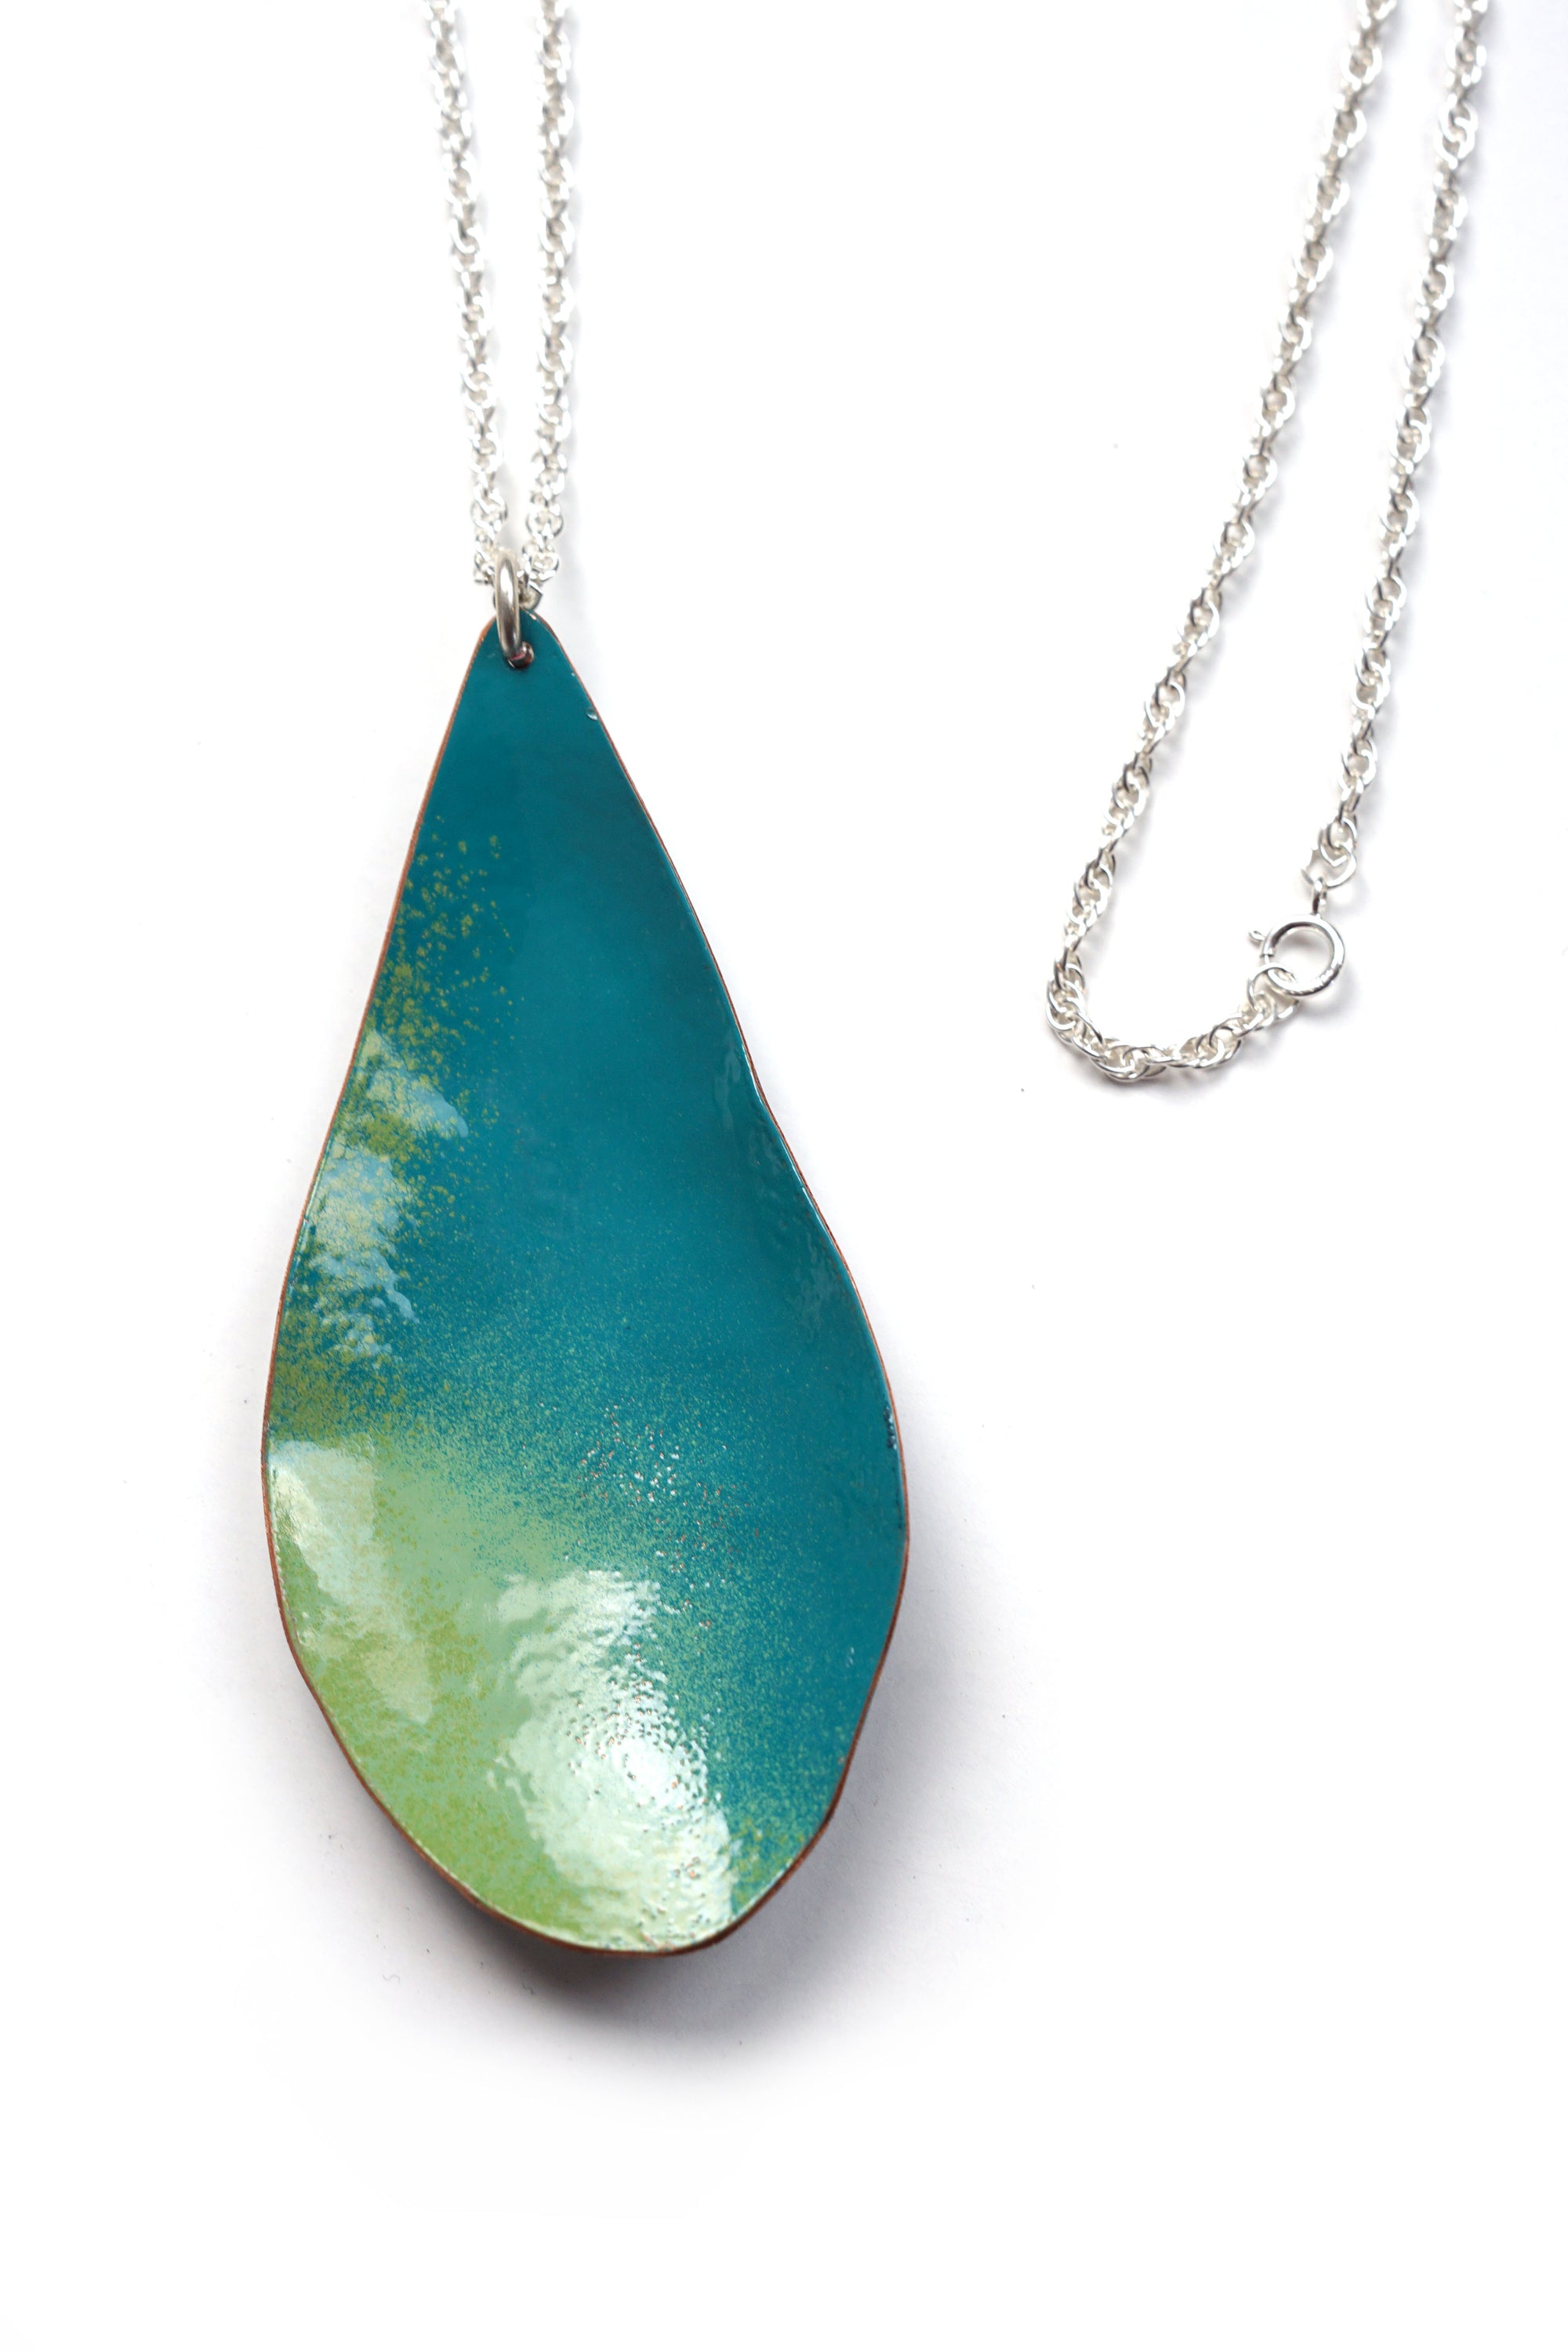 Long Chroma Pendant in Bold Teal and Pale Green